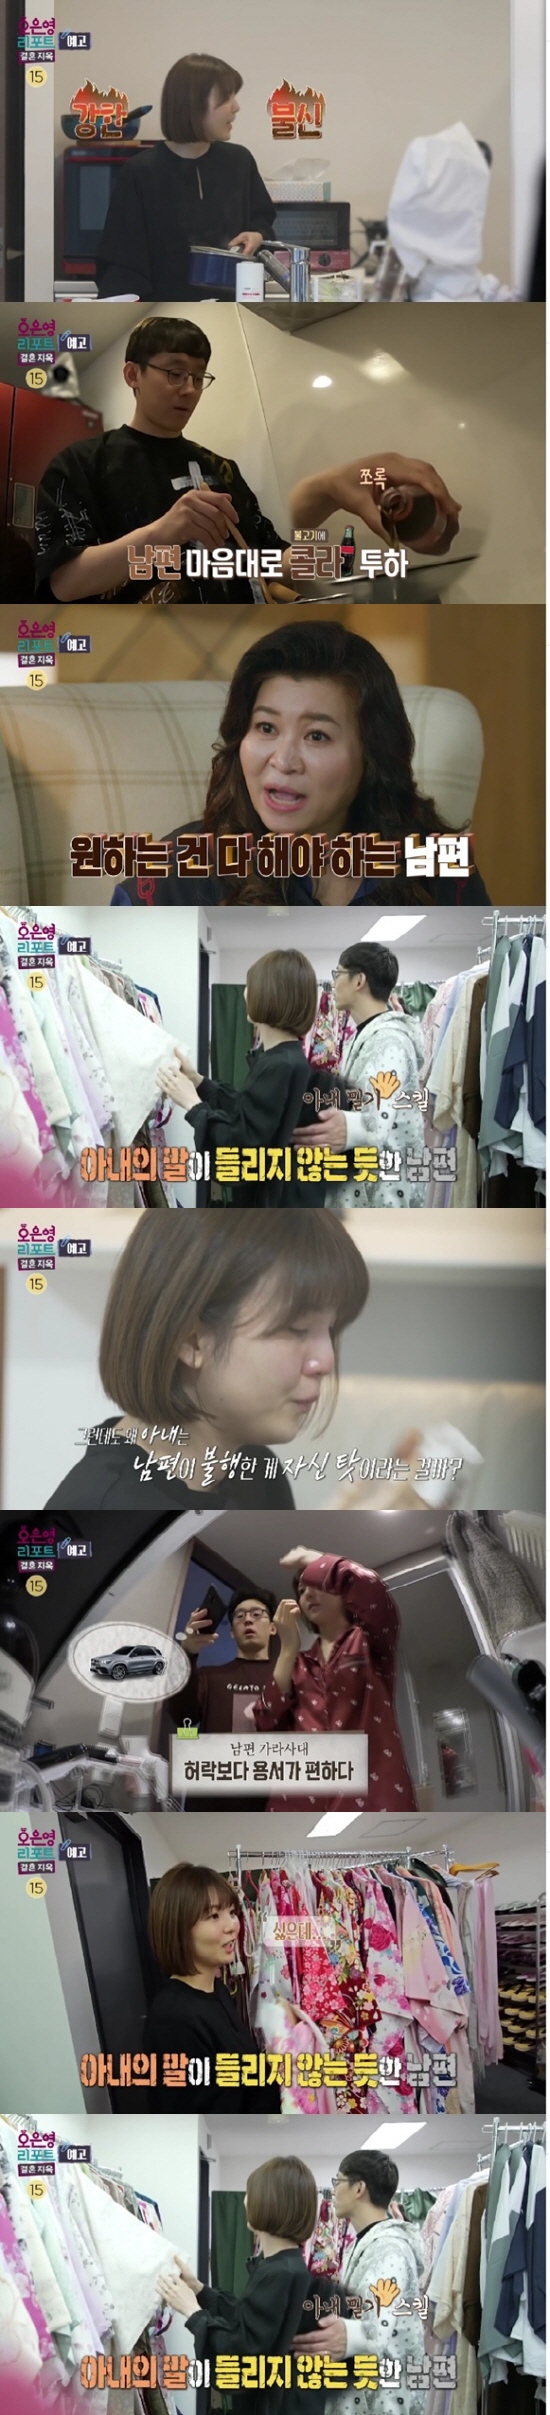 MBCs Oh Eun-young Report - Marriage Hell, which airs at 10:45 p.m. on the 10th, featured a very special  ⁇ Tokyo Yimong Couple who came across the sea.MC Kim Eung-soo showed off his fluent Japanese language and released the tension of Wife. MC owner who watched it laughed, saying, Did you interview in advance?I met in Japan and now I am in my fifth year of marriage. What kind of story did they find Oh Eun Young The Report?Husband fell in love with Wife at first sight, whom he met at the same university.Wife also said she was attracted to Husbands idol-like appearance in Korea.When asked why he decided to appear in Oh Eun-young Report - Marriage Hell to two people who seemed happy, Wife said that there was a problem that they could not solve.What was the problem that the Korea-Japan Couple could not solve by talking together?At 7 a.m., while Wife busily prepared a meal, Husband lay on the couch, staring at his cell phone screen and watching YouTube.Husband was looking at a luxury car introduction video. Husband tells Wife about his dream of making his own car, but Wife responded as if he were accustomed to this situation.Husband did not stop talking about the car at the dinner, not knowing how Wife felt.Husbands love of luxury cars was not the end of this. Husband wanted to welcome Wife to his home after work, and once again he started to talk about cars.Husband s endless car talk, Haha is laughing and laughing, and there is no build - up. I was amazed at Husband s obsession with the car.Wife said she bought a car in the past but sold her car in just three months and said she did not need a car and did not have to take that much risk.Husband, however, did not back down, saying that buying a car would motivate my economic activities. There was a tense atmosphere between the two people with different values about the car, and the studio was also tense.Couple visited Japans dating spot  ⁇ Asakusa ⁇  to shoot YouTube content.Wife wants to wear plain clothes, but Husband insists on colorful clothes. Even with Wifes strong rejection, Husband said he should wear a colored kimono that will attract subscribers attention for content.Wife repeatedly voiced her disapproval, but Husband persisted.In the end, Wife said, I did not intend to listen to my opinion in the first place. Park Ji-min, who watched, was extremely angry that he knew only  ⁇  Husband content.Wife said, Even if the viewer is happy, I am not happy.  ⁇  YouTube hits are important or am I more precious?Oh Eun Young rebuked Husbands actions toward the goal, saying that he was too uncomfortable throughout the video.That evening, Couple invites another Han-il Couple to his house, where Couple confides to his friends about his troubles with his post-natal plans.Husband wants to spend time in his hometown of Korea for parental leave, but Wife has helped his mother after giving birth and wants to concentrate on childcare.Husband said that he wanted to return to Korea with his birth, saying that he had a lot of frustration when he lived in Japan.In Husbands confession, Wife added, Every time I talk about this, I feel sorry for my brother.However, when it comes to giving birth, Wife said, I want to rely on my only mother in the world. But Husband said, Parental leave is my only chance to live abroad.Why does Husband want to go to Korea so much?Tokyo Imong Couple lives under the same roof, but each has different dreams due to cultural and emotional differences.Oh Eun Youngs Healing The Report for Couples residing overseas will be available at 10:45 pm on October 10 at MBC Oh Eun-young Report - Marriage Hell.Photograph: MBC